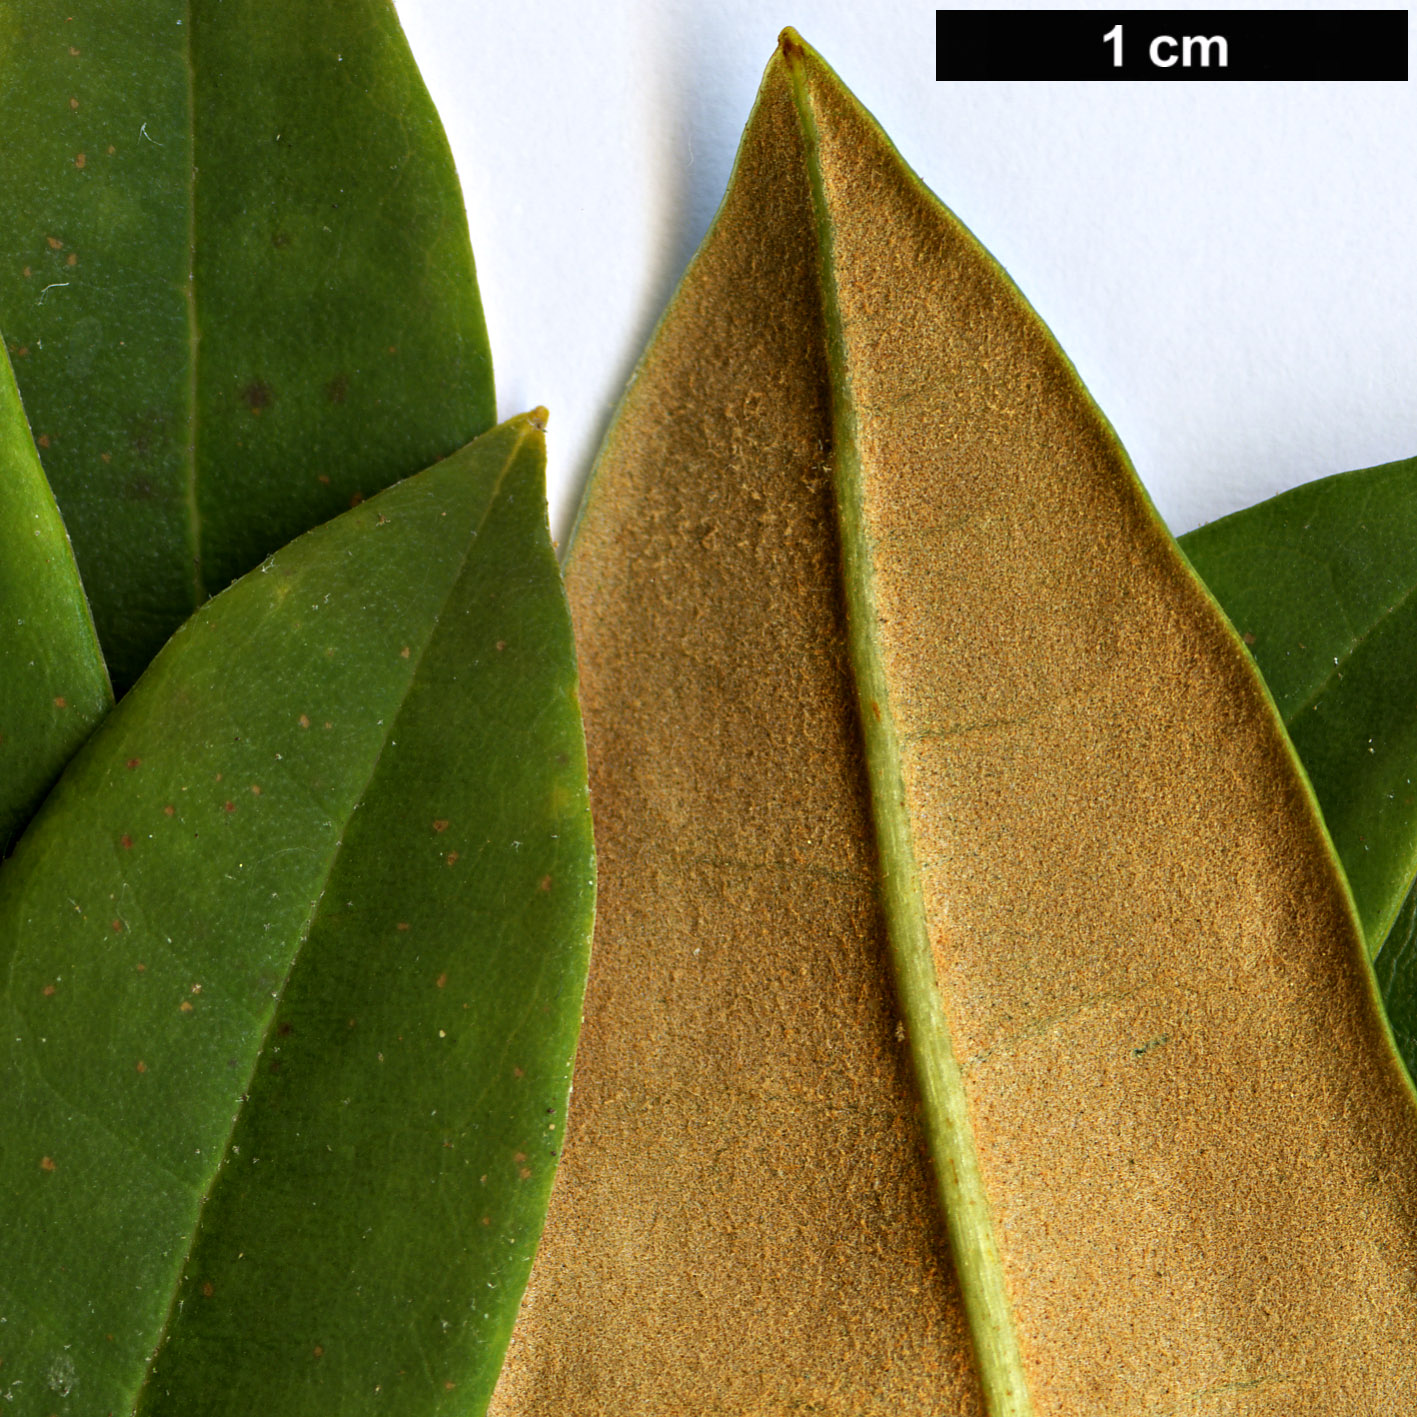 High resolution image: Family: Ericaceae - Genus: Rhododendron - Taxon: longipes